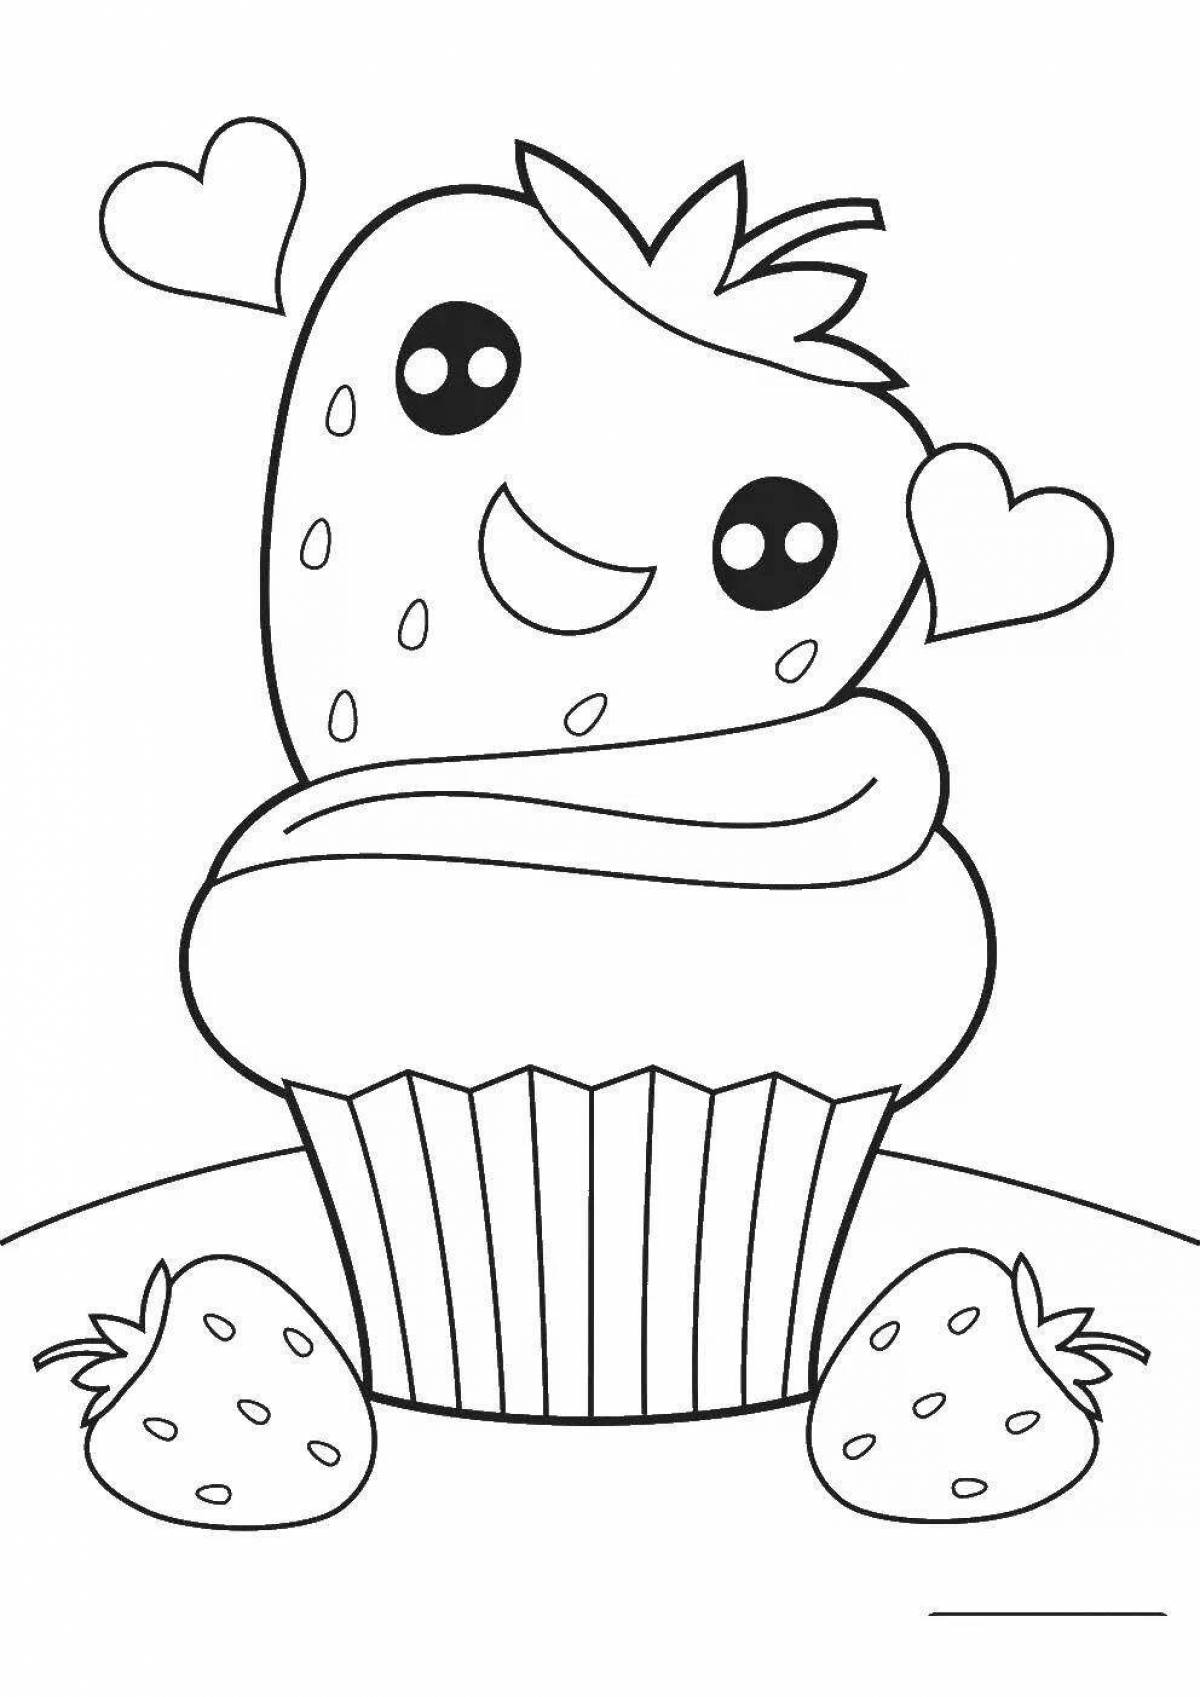 Animated cute food coloring page with eyes